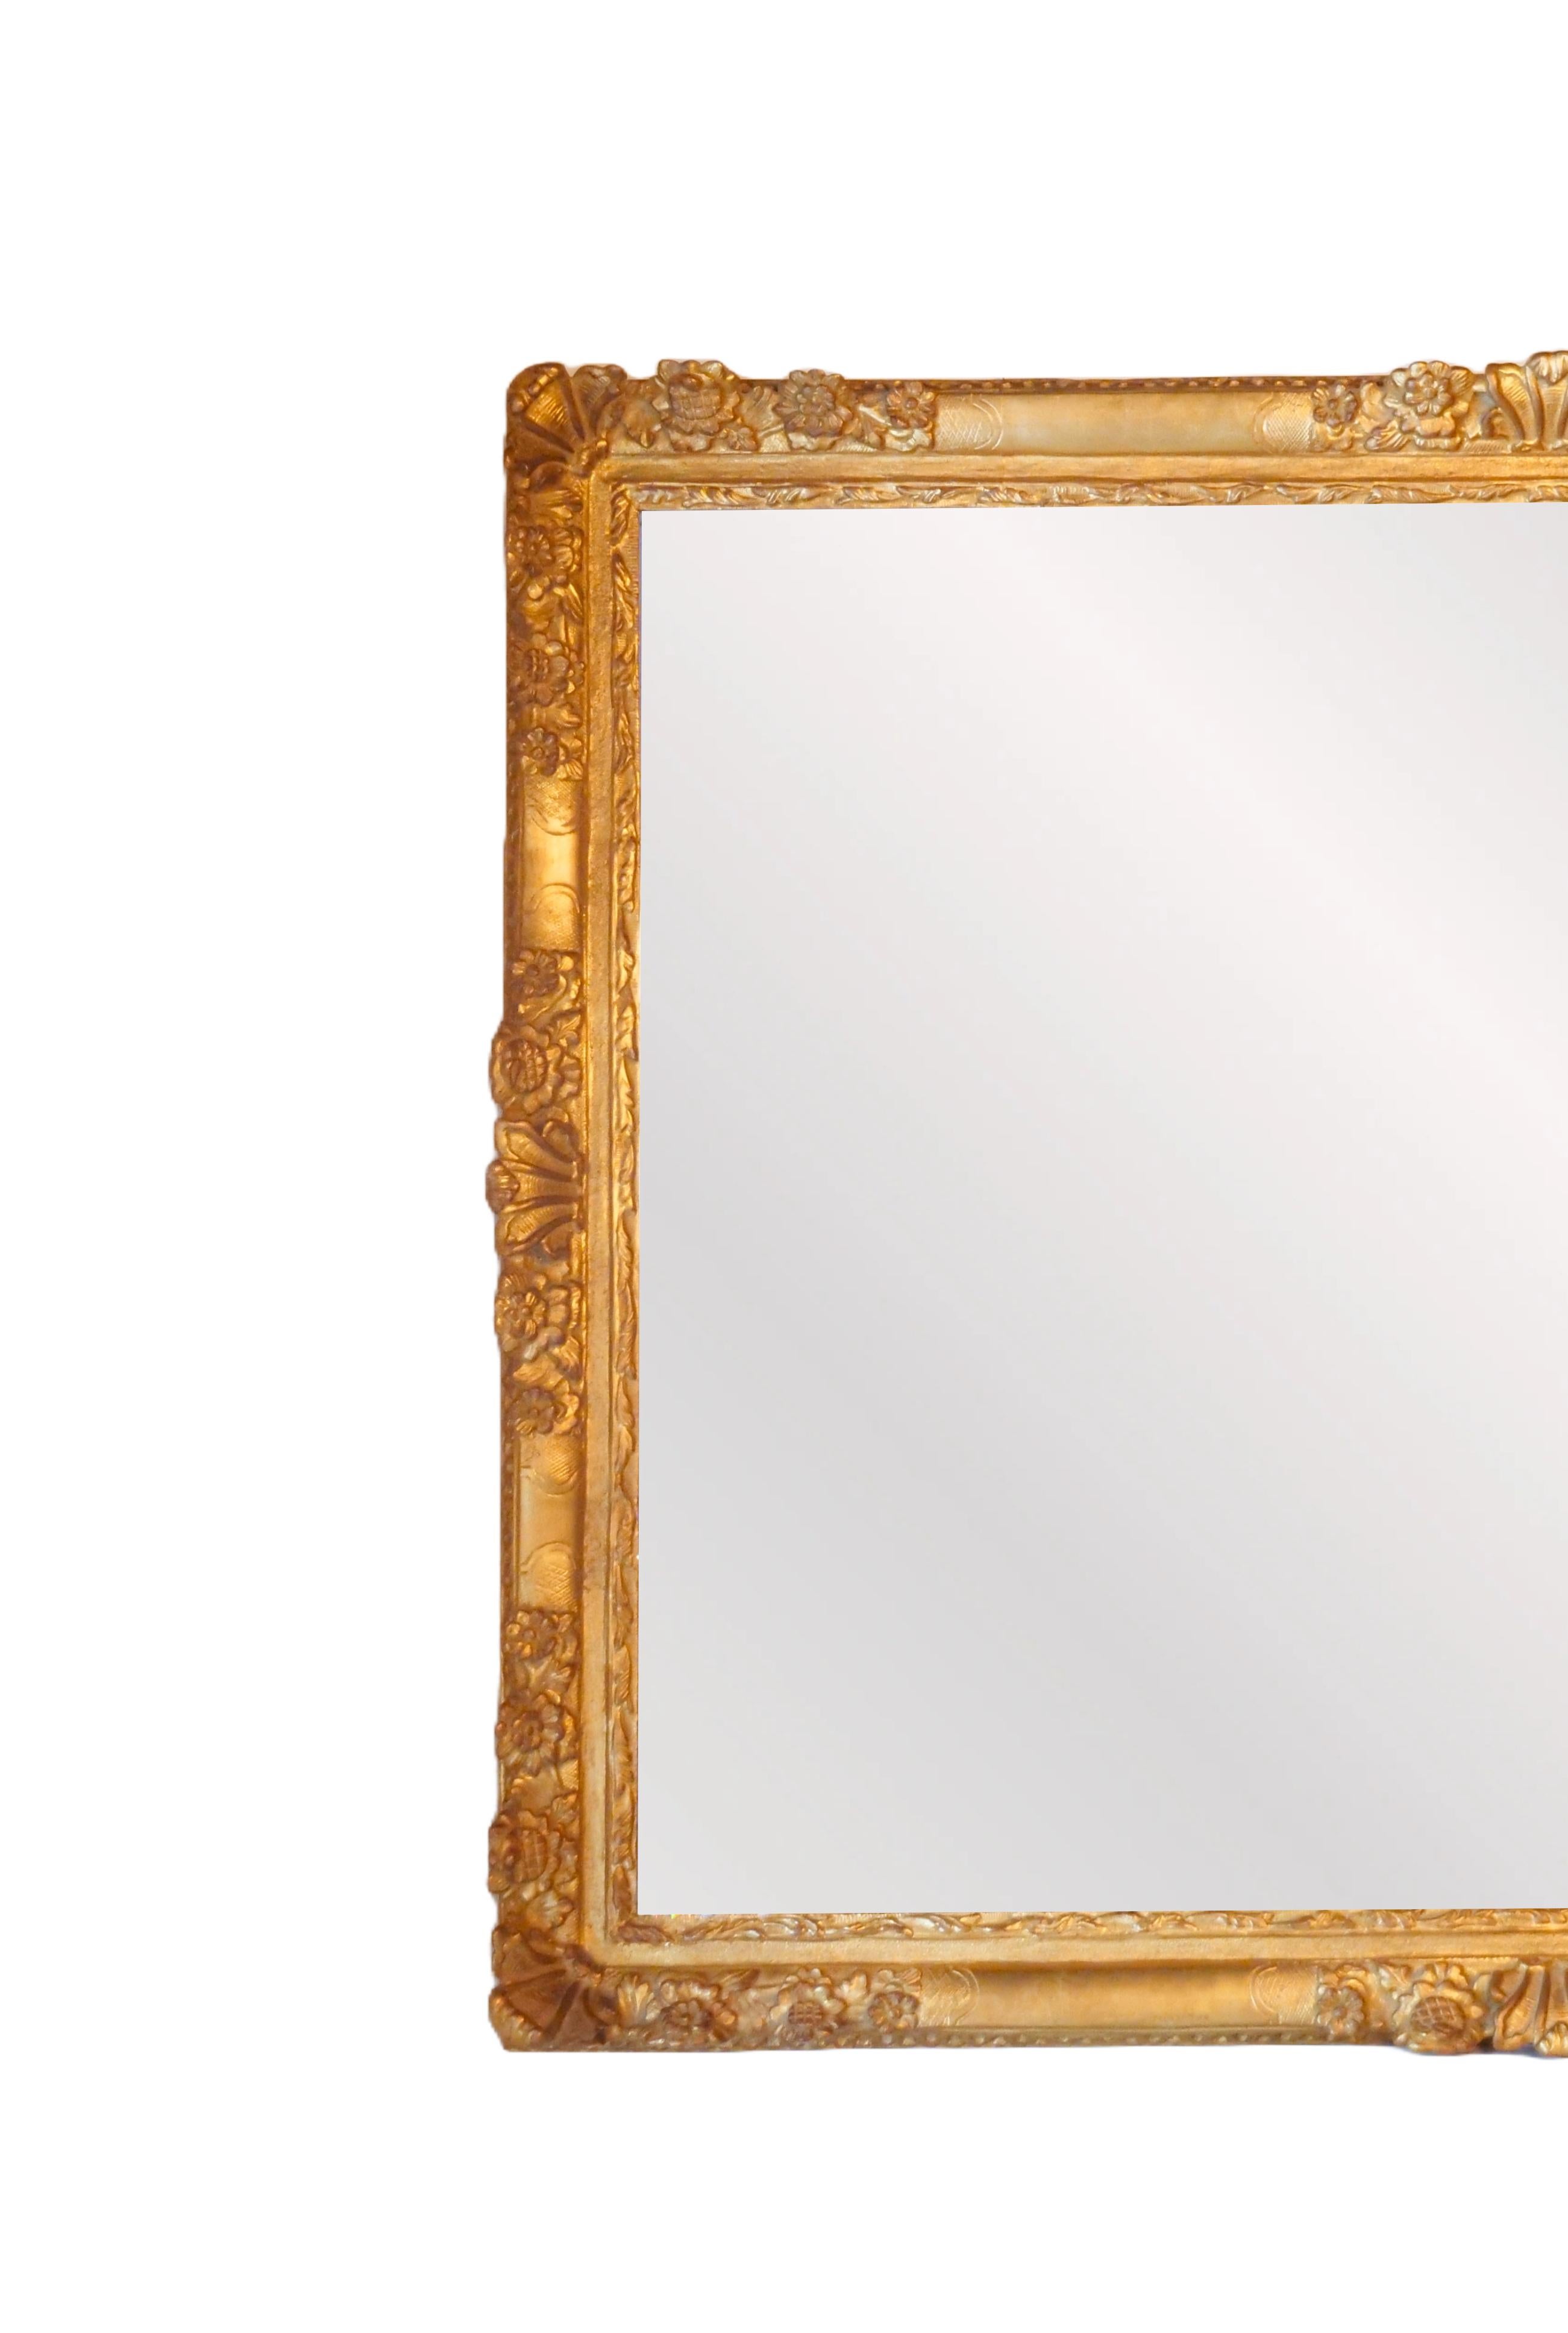 Hand-Crafted Exceptional French Giltwood Frame Rectangular Shape Hanging Wall Mirror For Sale